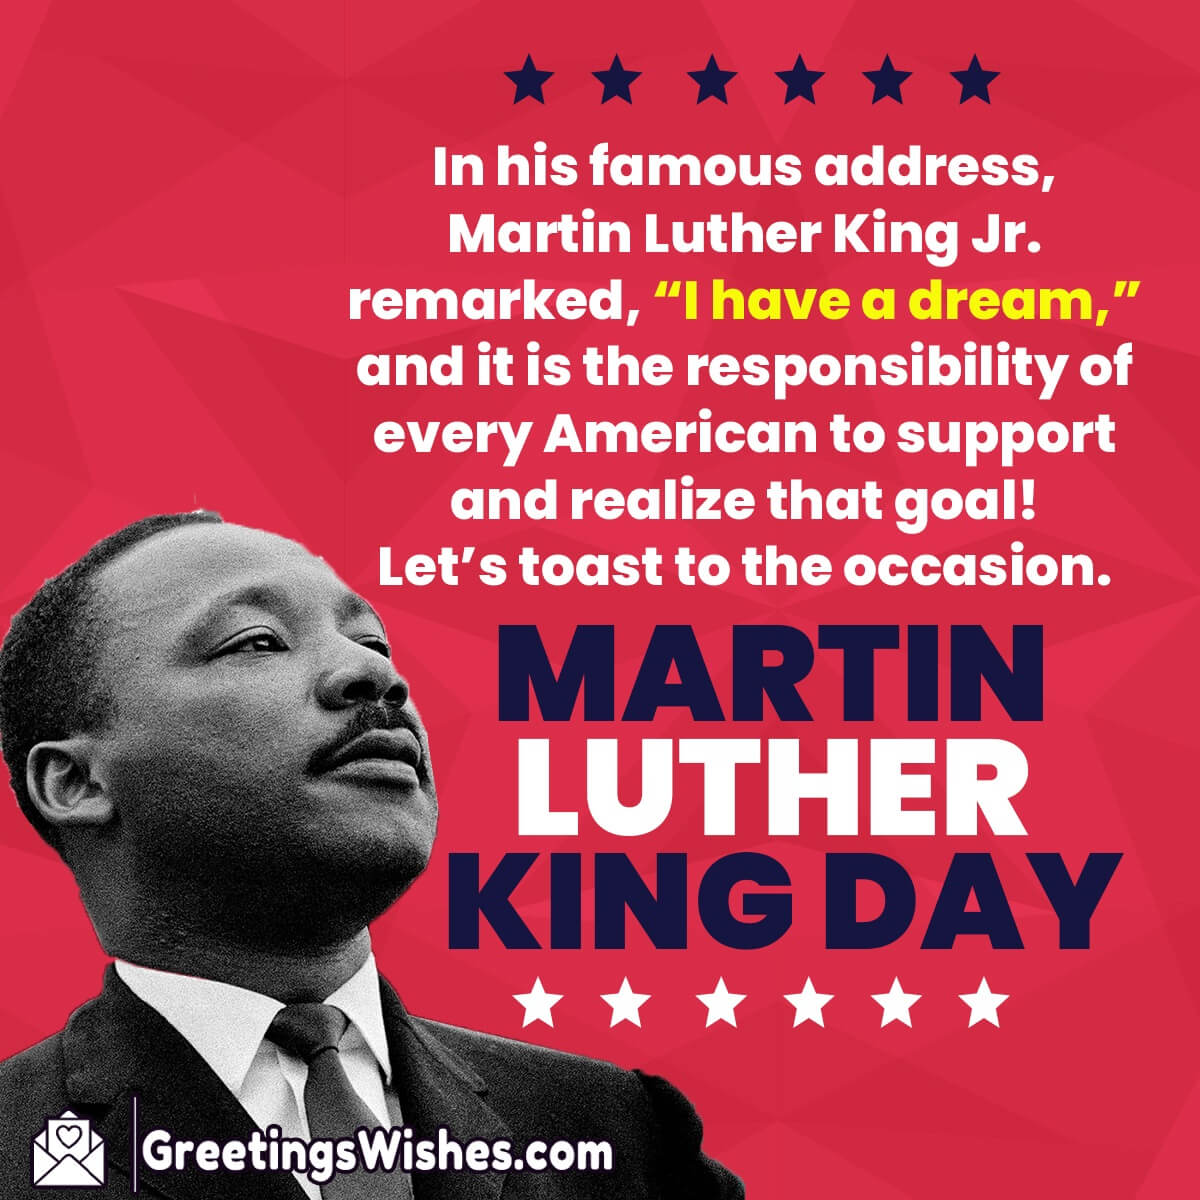 Martin Luther King Jr Day Message